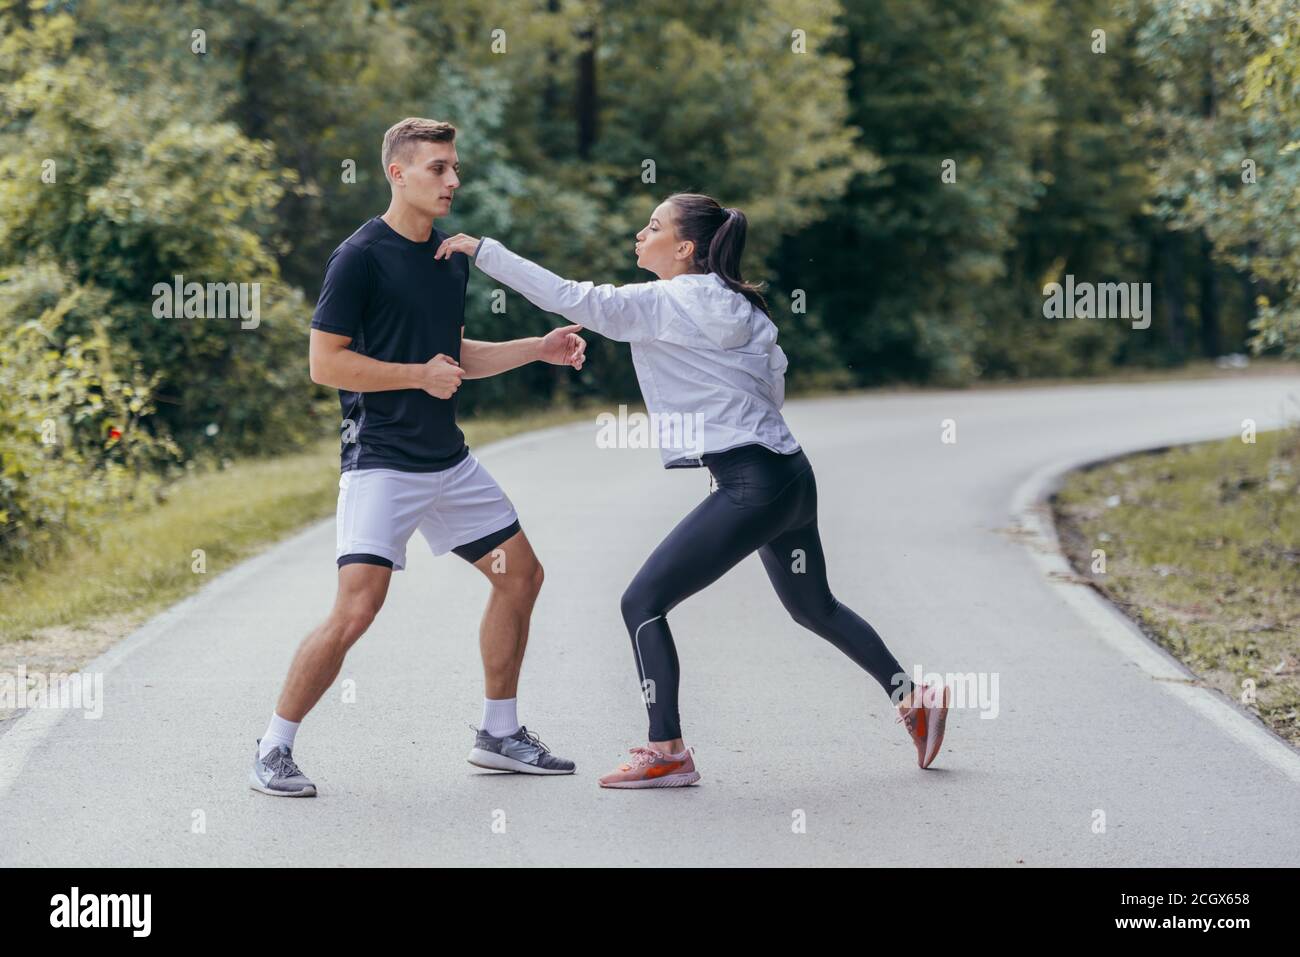 Young female defending herself from an attacher with karate moves. Stock Photo